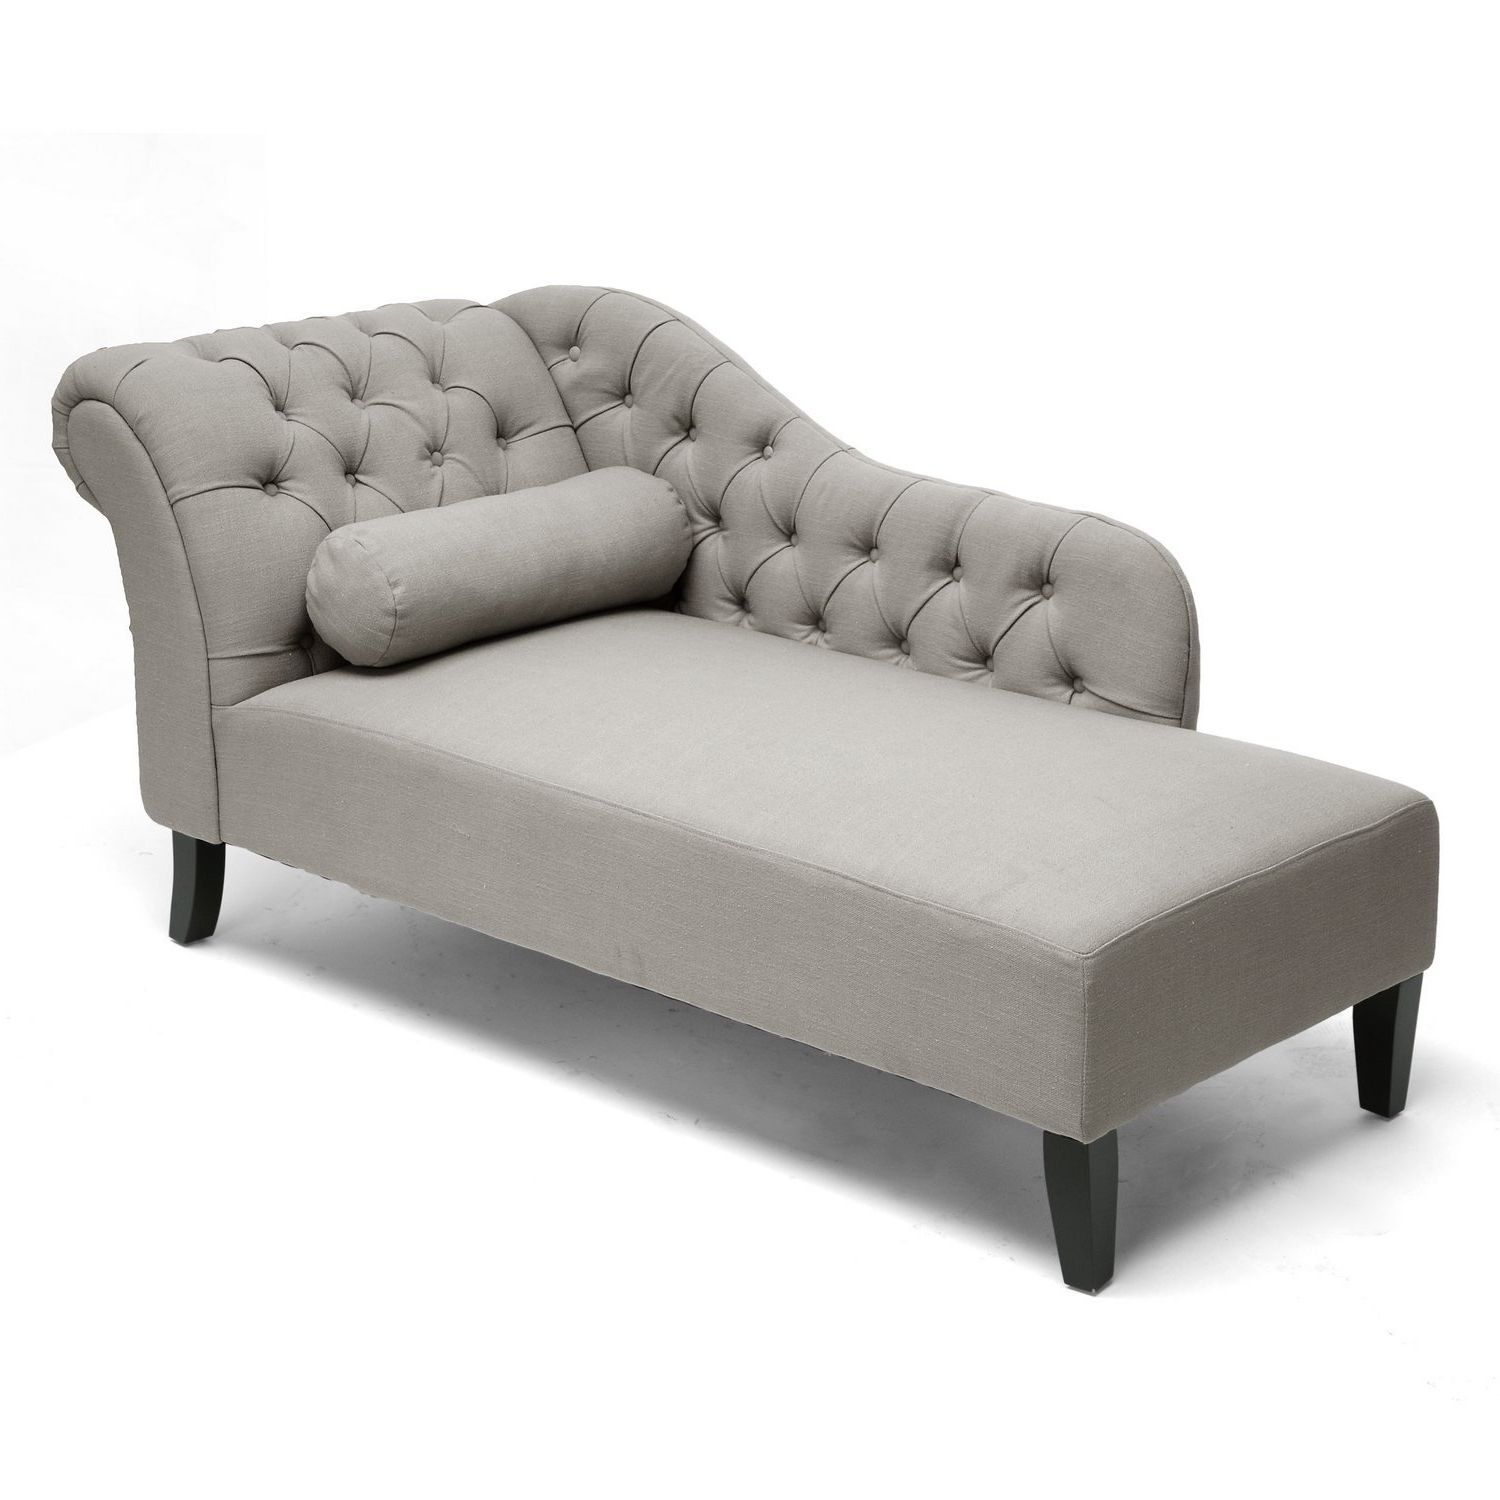 Gray Chaise Lounge Chairs Pertaining To Well Known Grey Chaise Lounge Chair – Goenoeng (View 8 of 15)